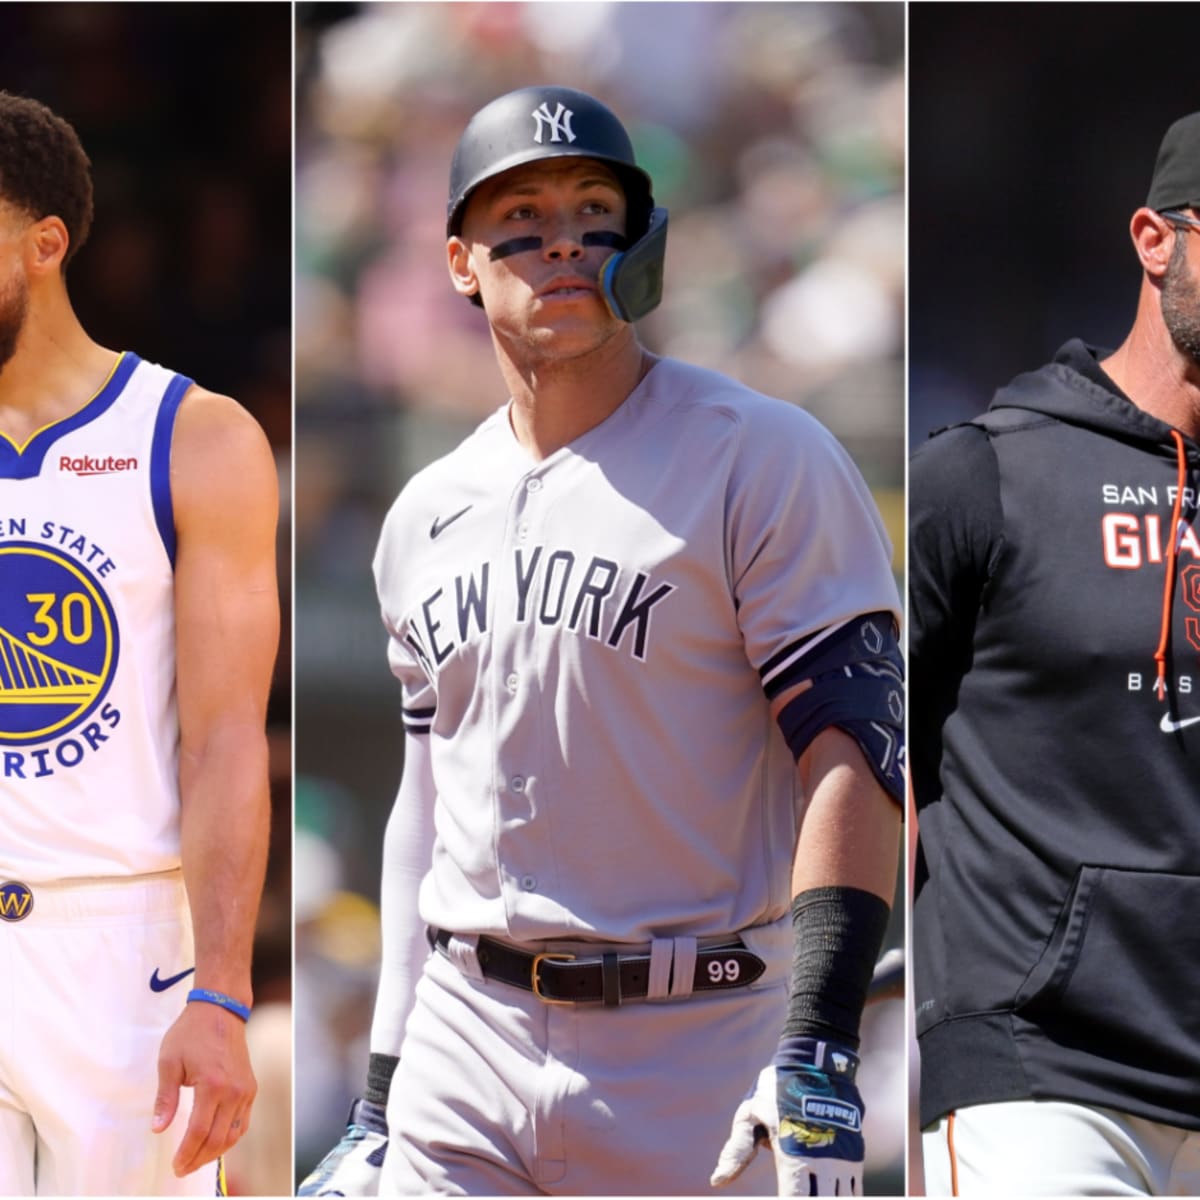 Giants' Aaron Judge free agency pitch included Steph Curry